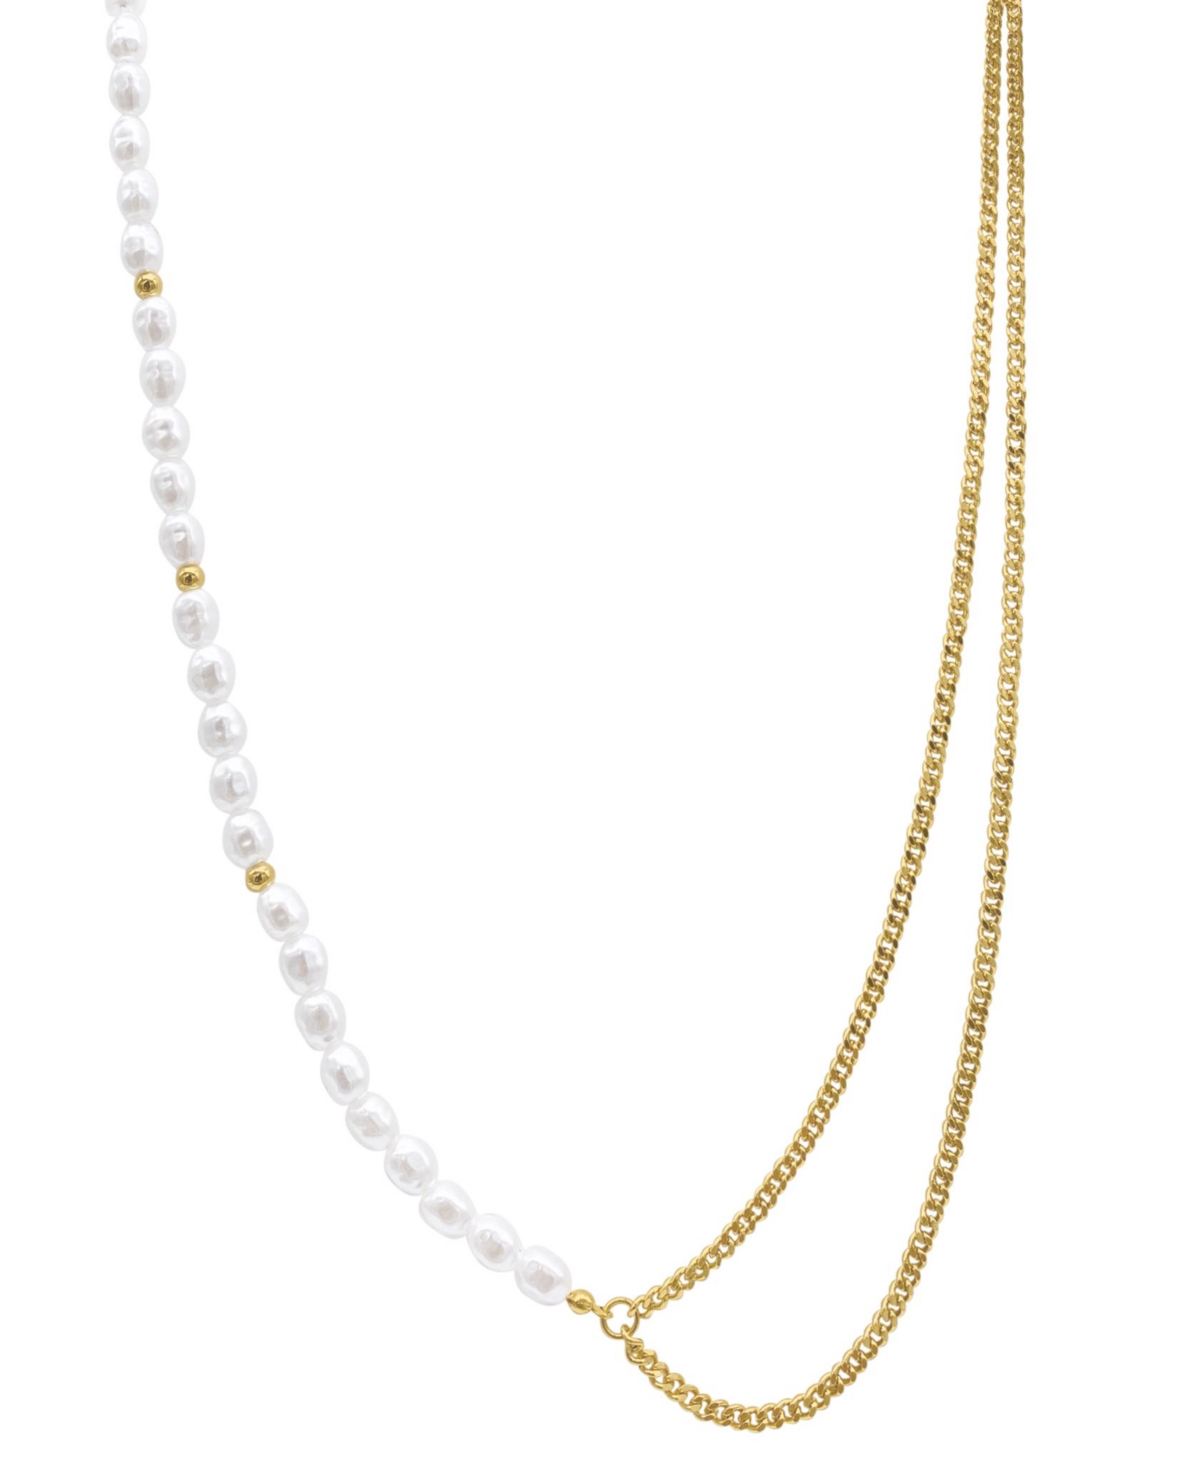 14k Gold-Plated Curb Chain & Mother-of-Pearl Draping Asymmetrical Strand Necklace, 26" + 3" extender - Gold